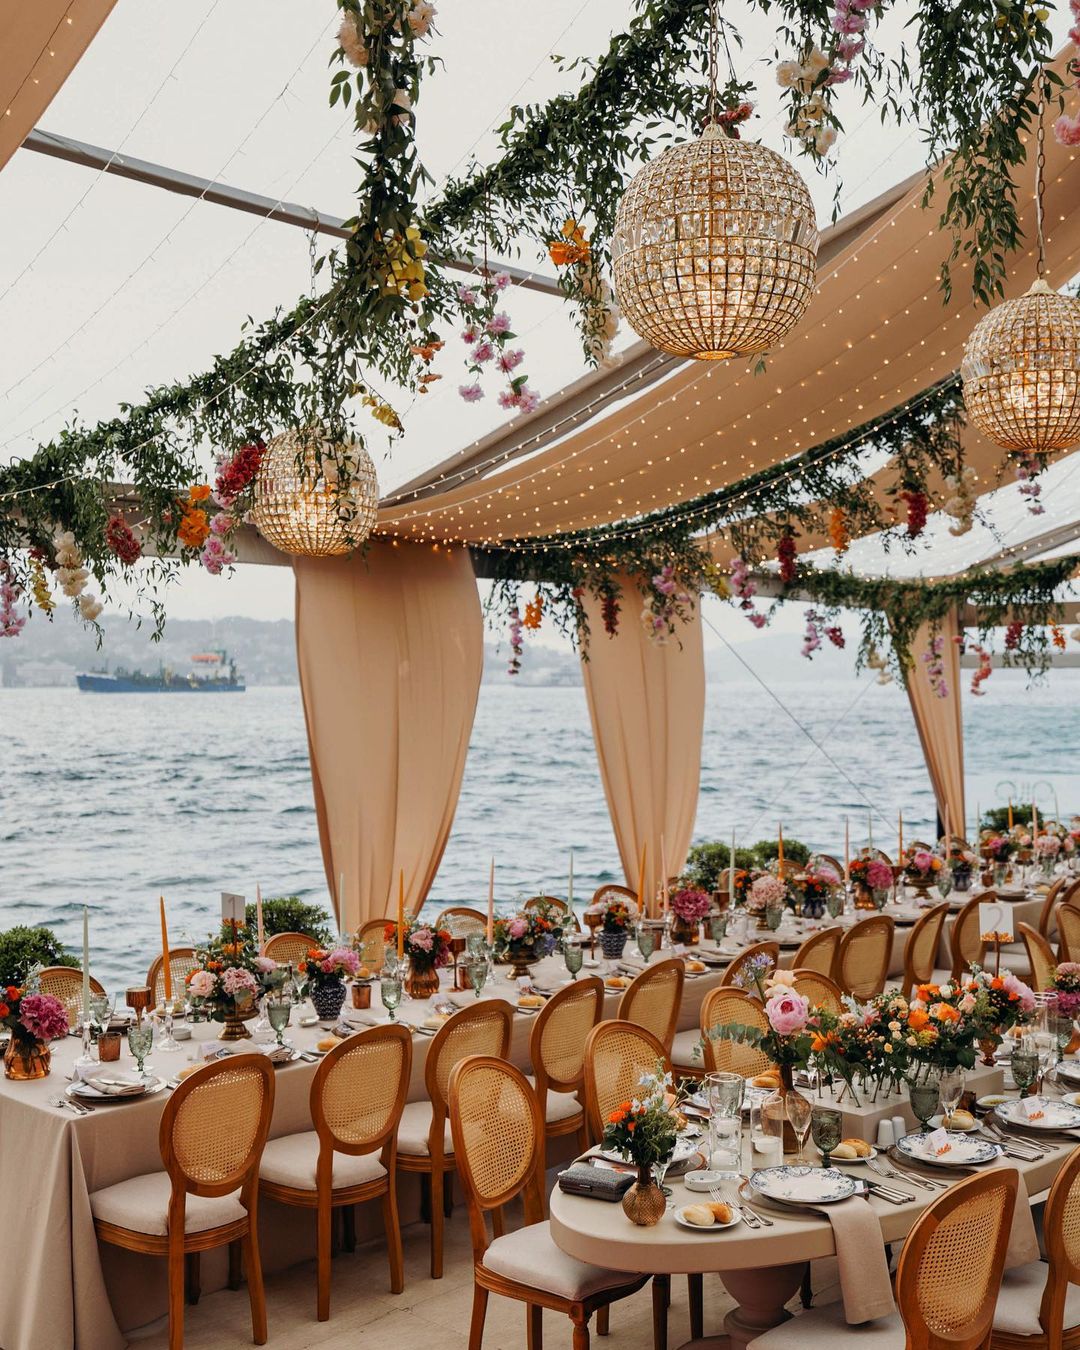 Weddings ar A’jia are something different - Best Restaurants with Bosphorus View